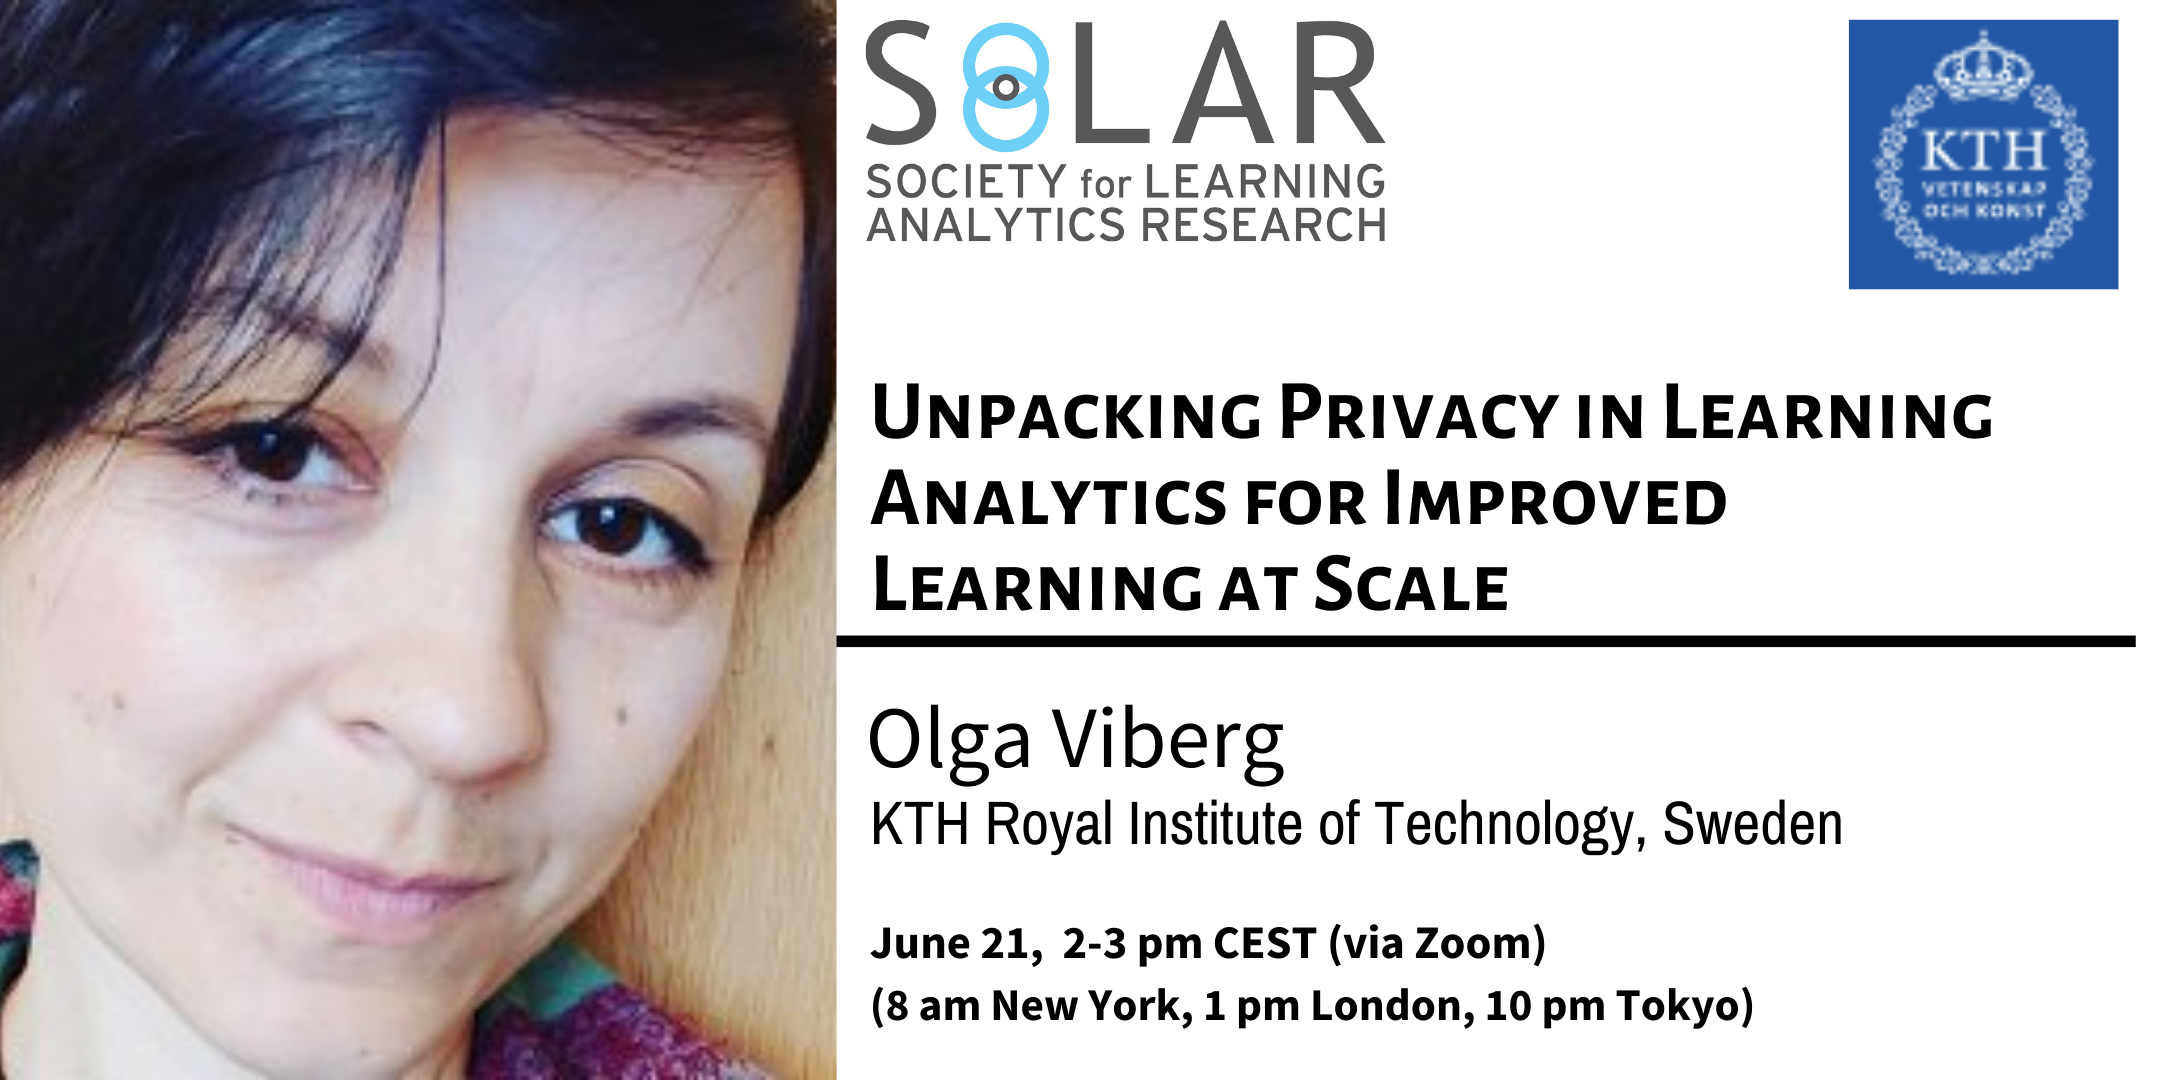 Upcoming Webinar on November 8, 12pm CST. Register now! - Society for  Learning Analytics Research (SoLAR)